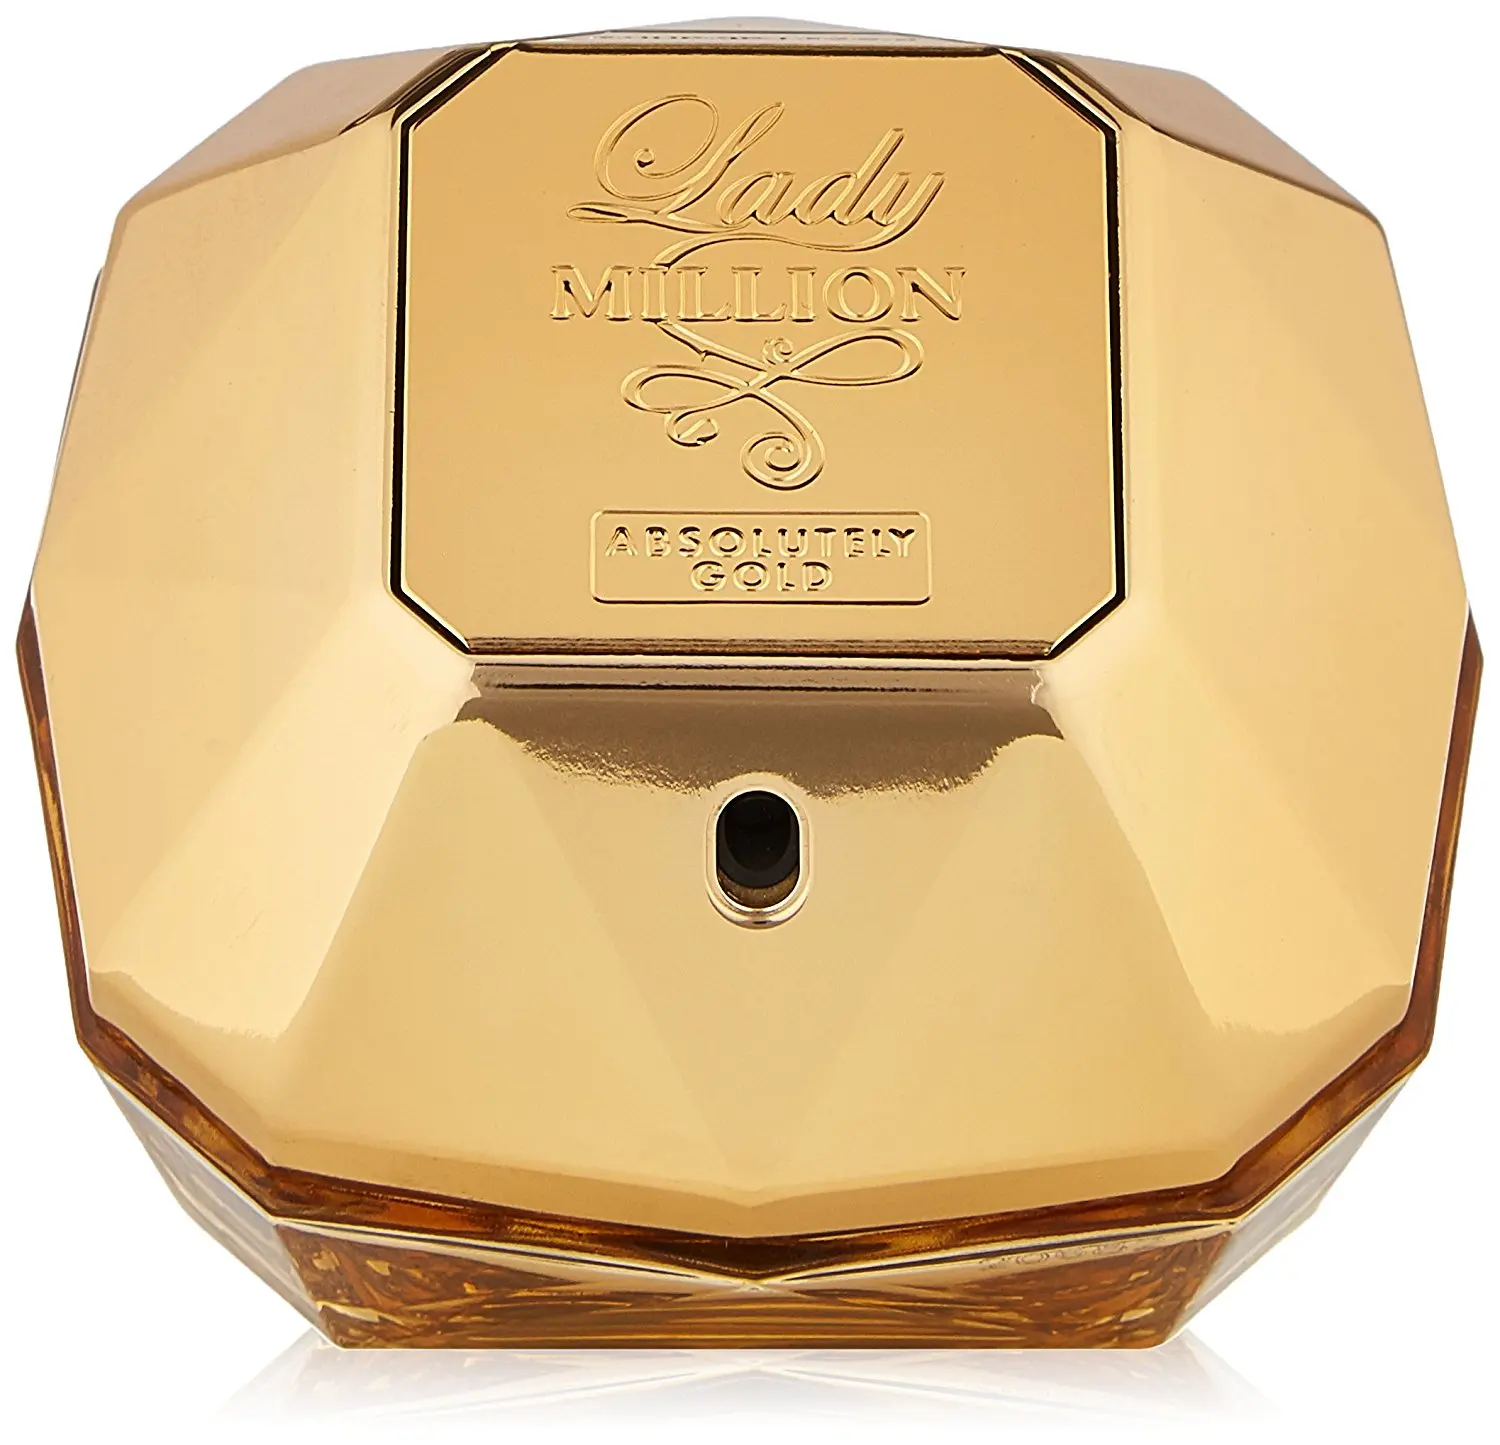 Cheap Perfume Lady Million, find Perfume Lady Million deals on line at